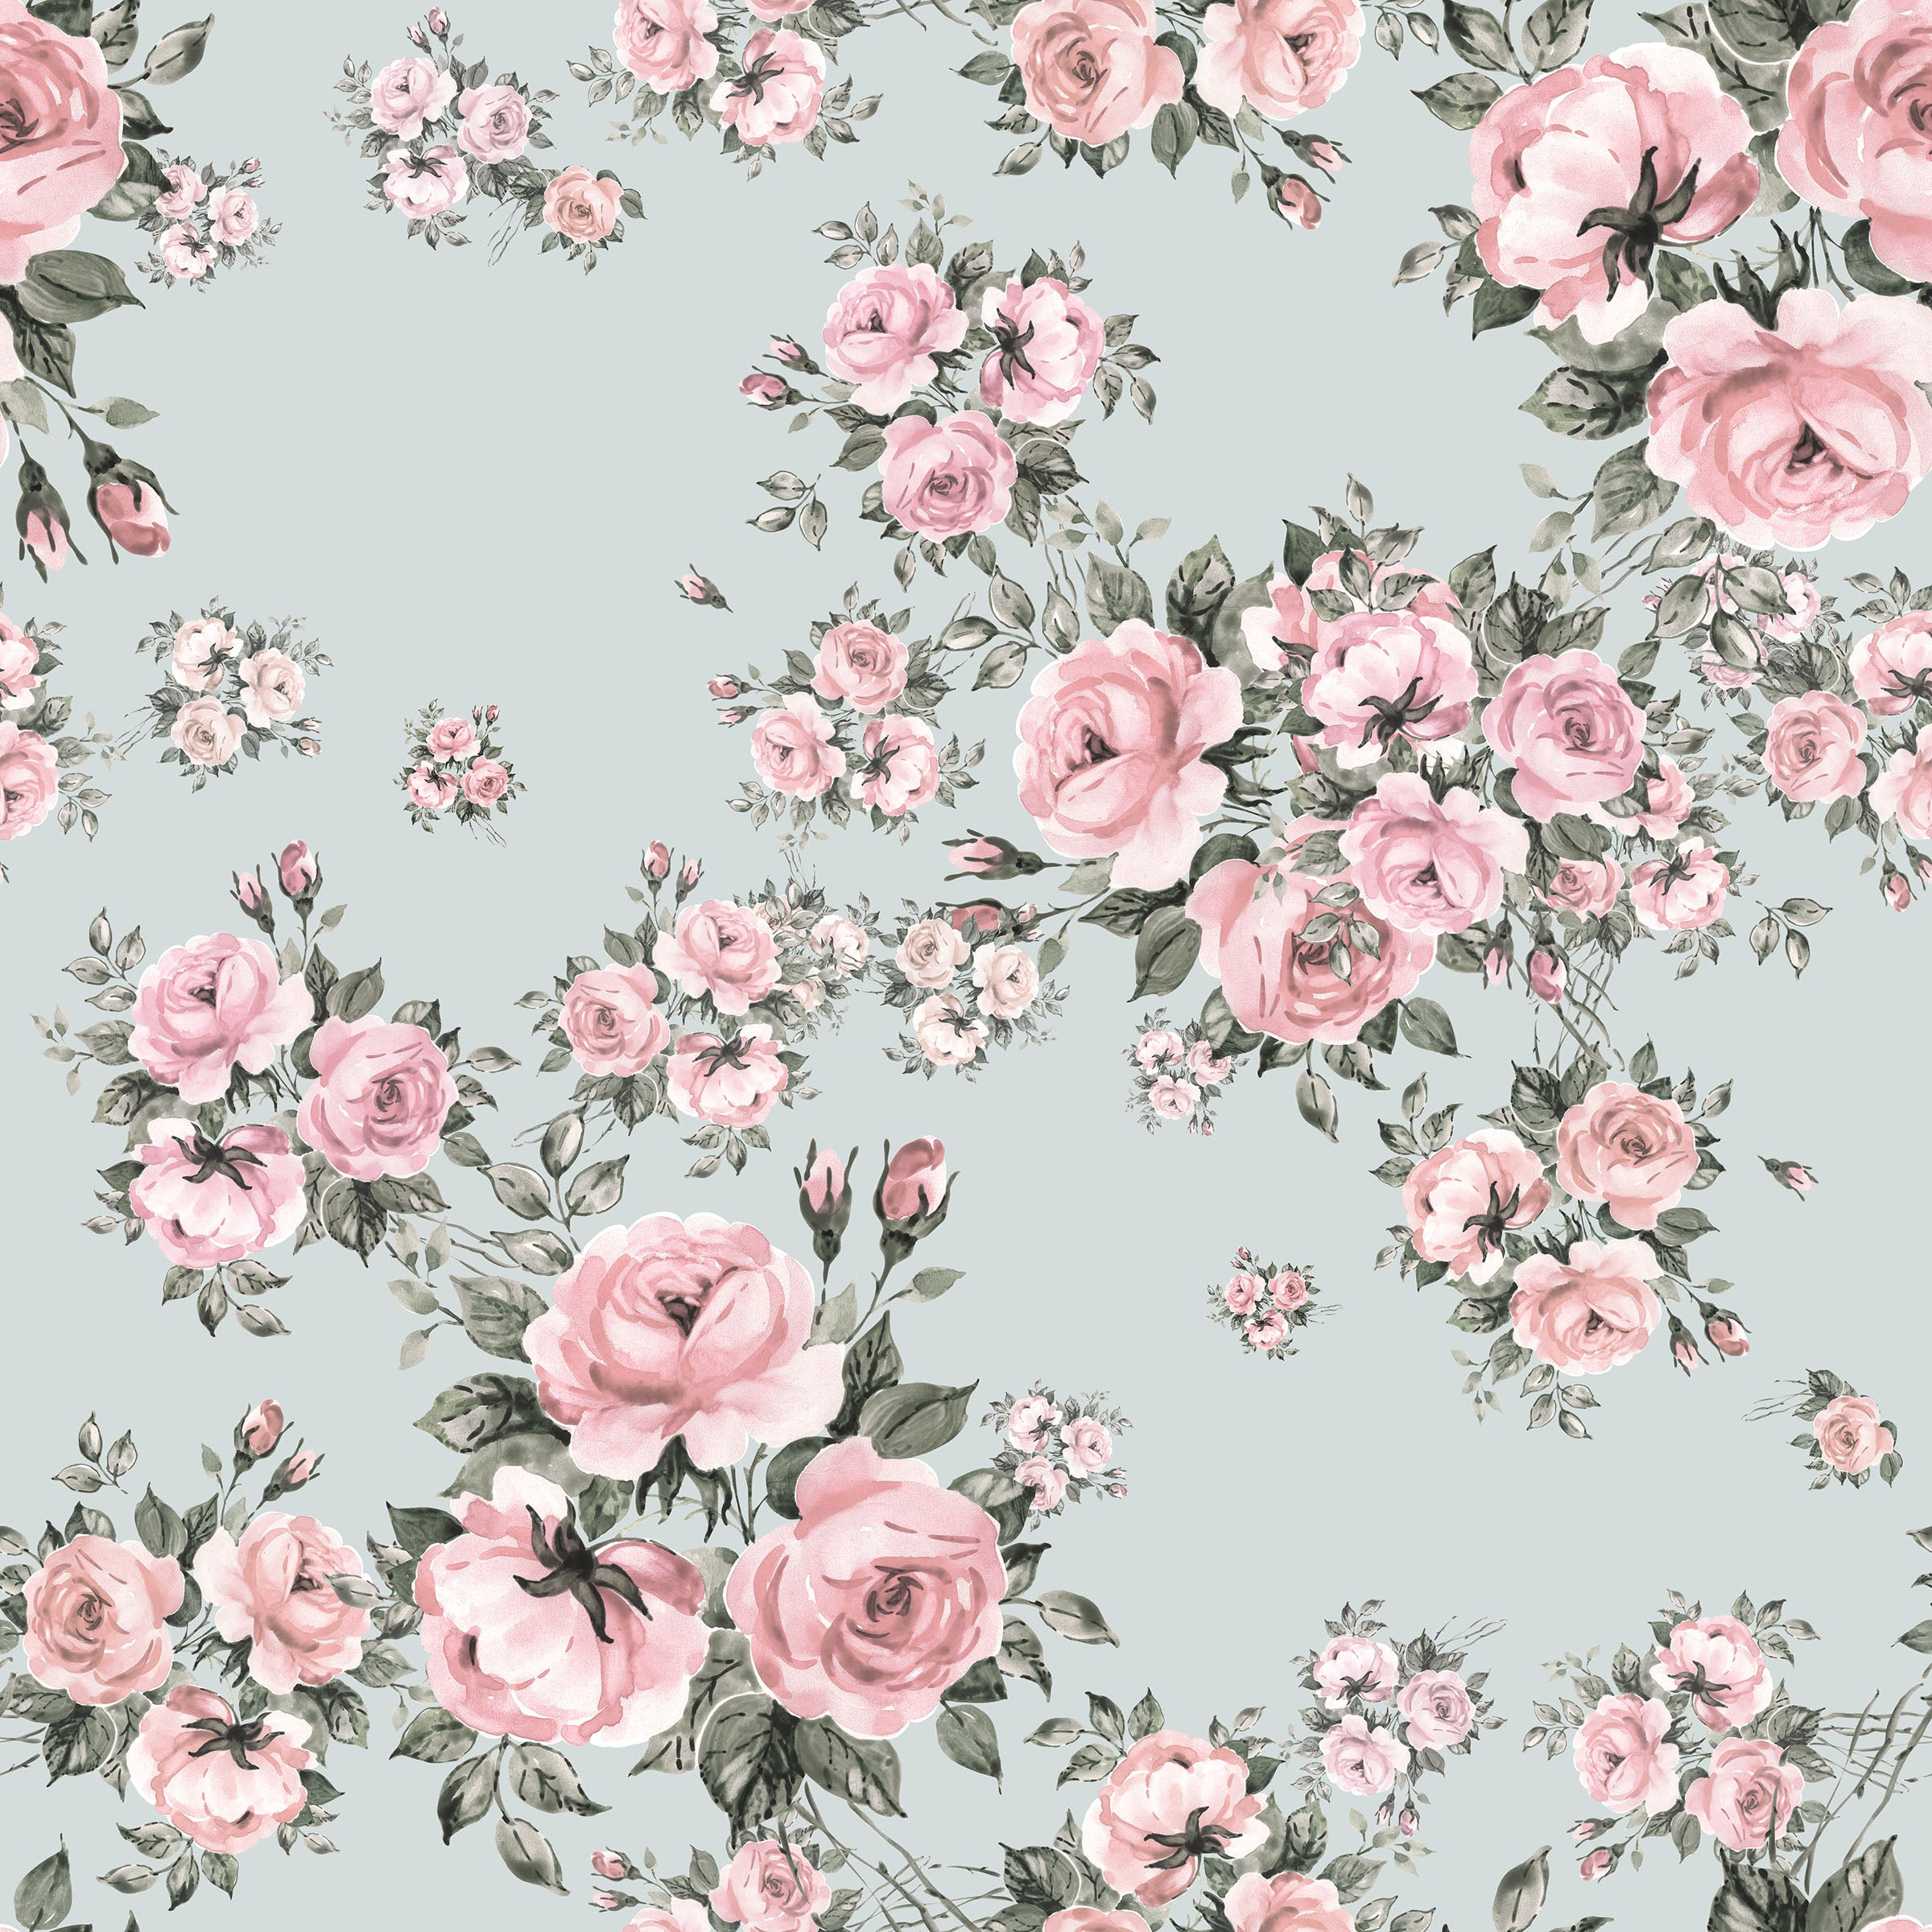 Close-up view of Rose Bouquet Wallpaper II, showing its intricate pattern of pink roses and green leaves on a light blue background, highlighting the detailed floral design